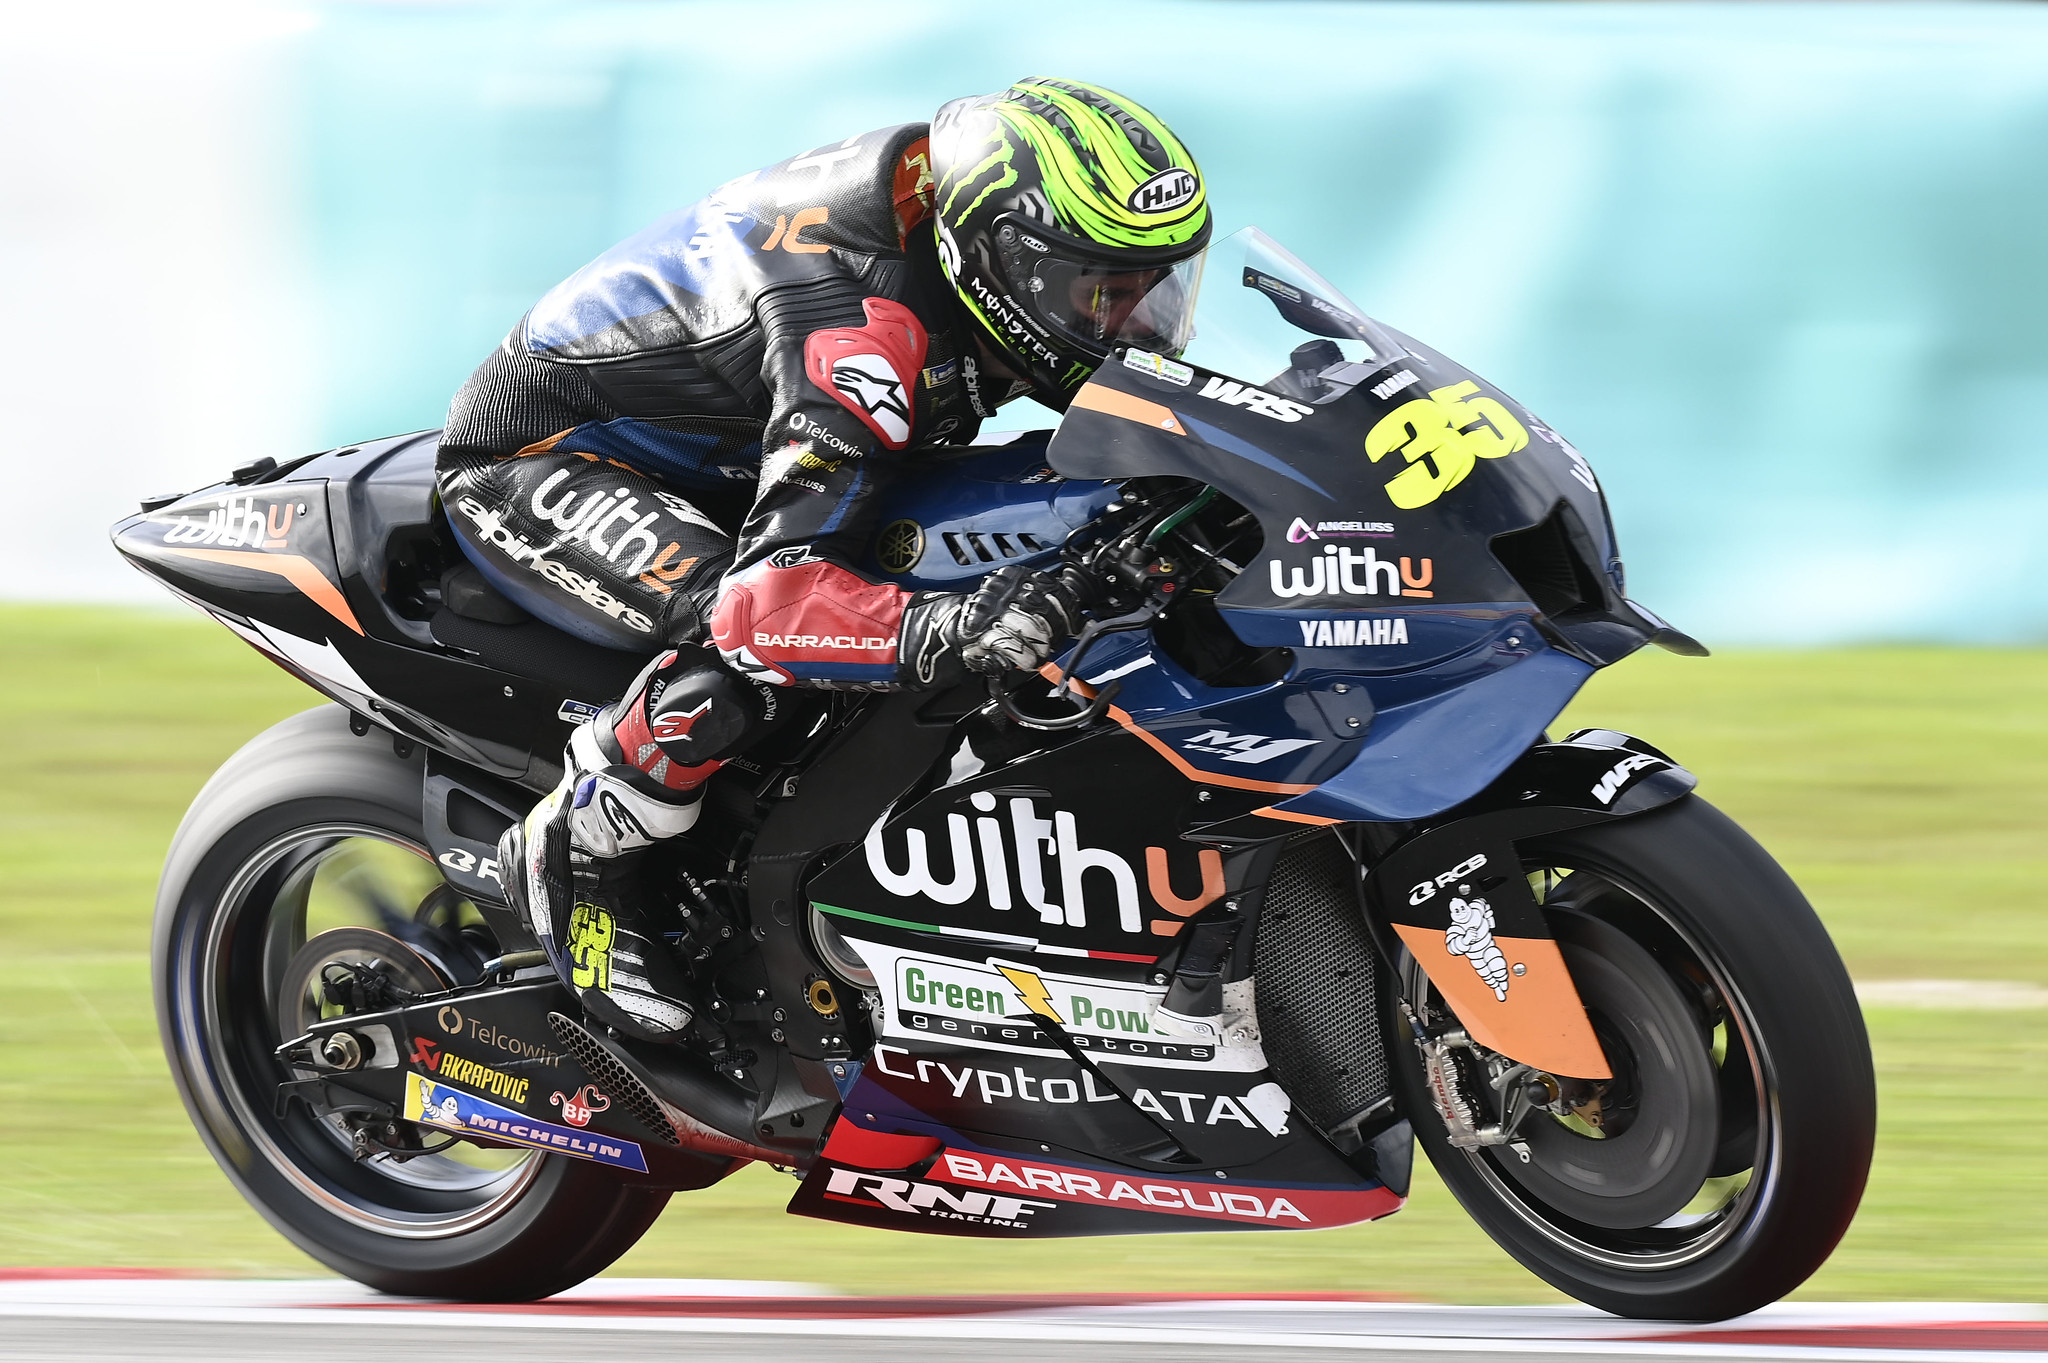 Crutchlow tops FP2 in Malaysia